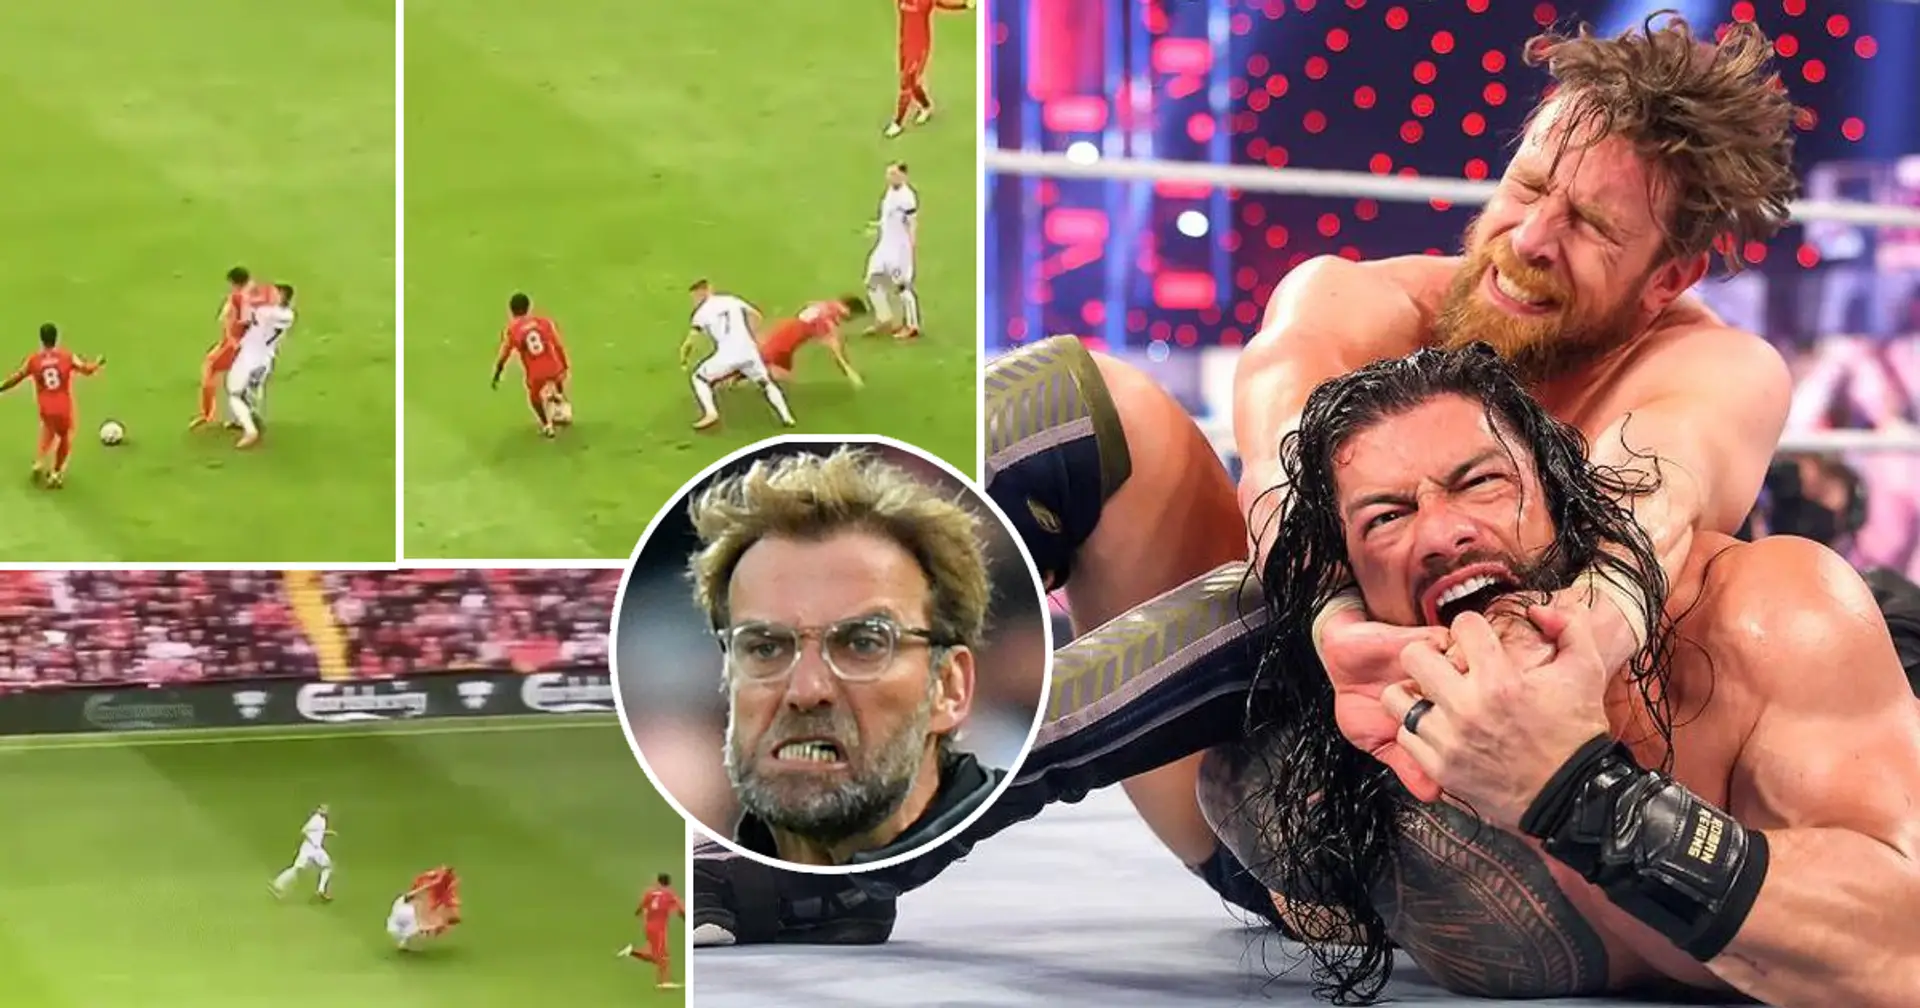 Going full WWE on Liverpool: Burnley's 2 disgusting challenges on Jota and Matip